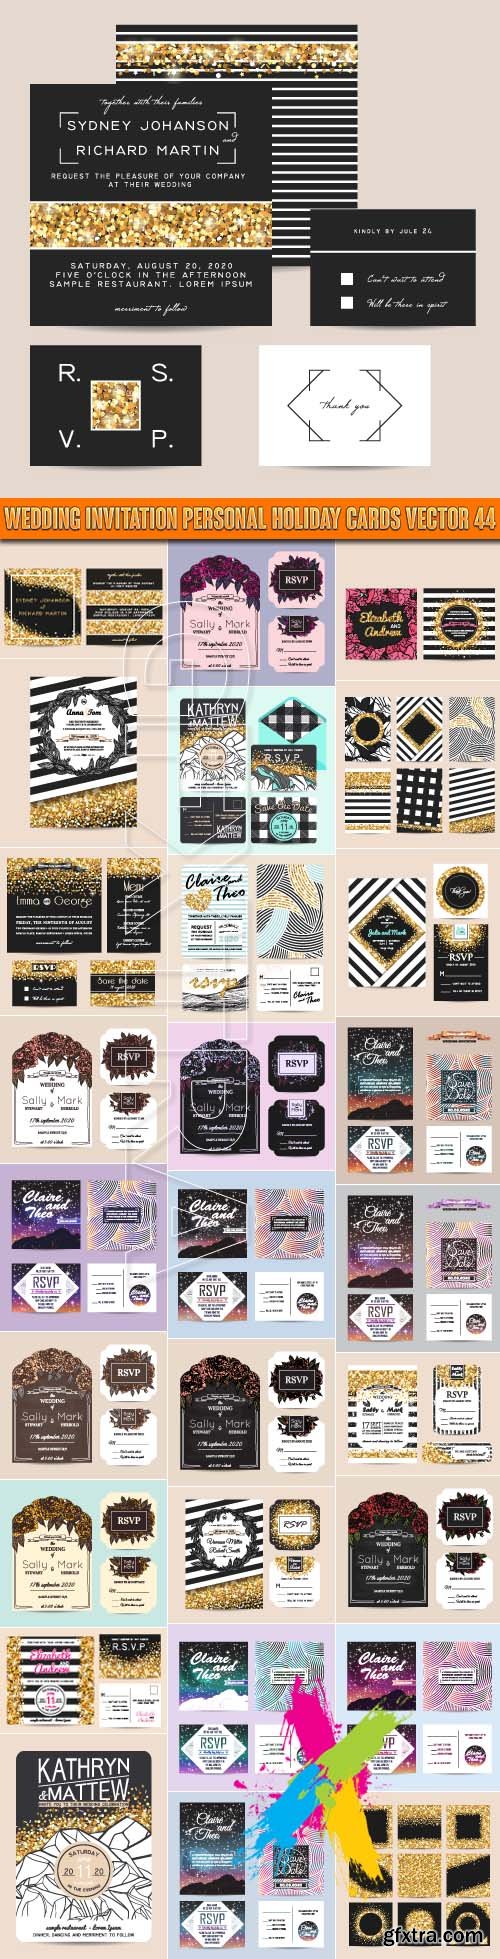 Wedding invitation personal holiday cards vector 44